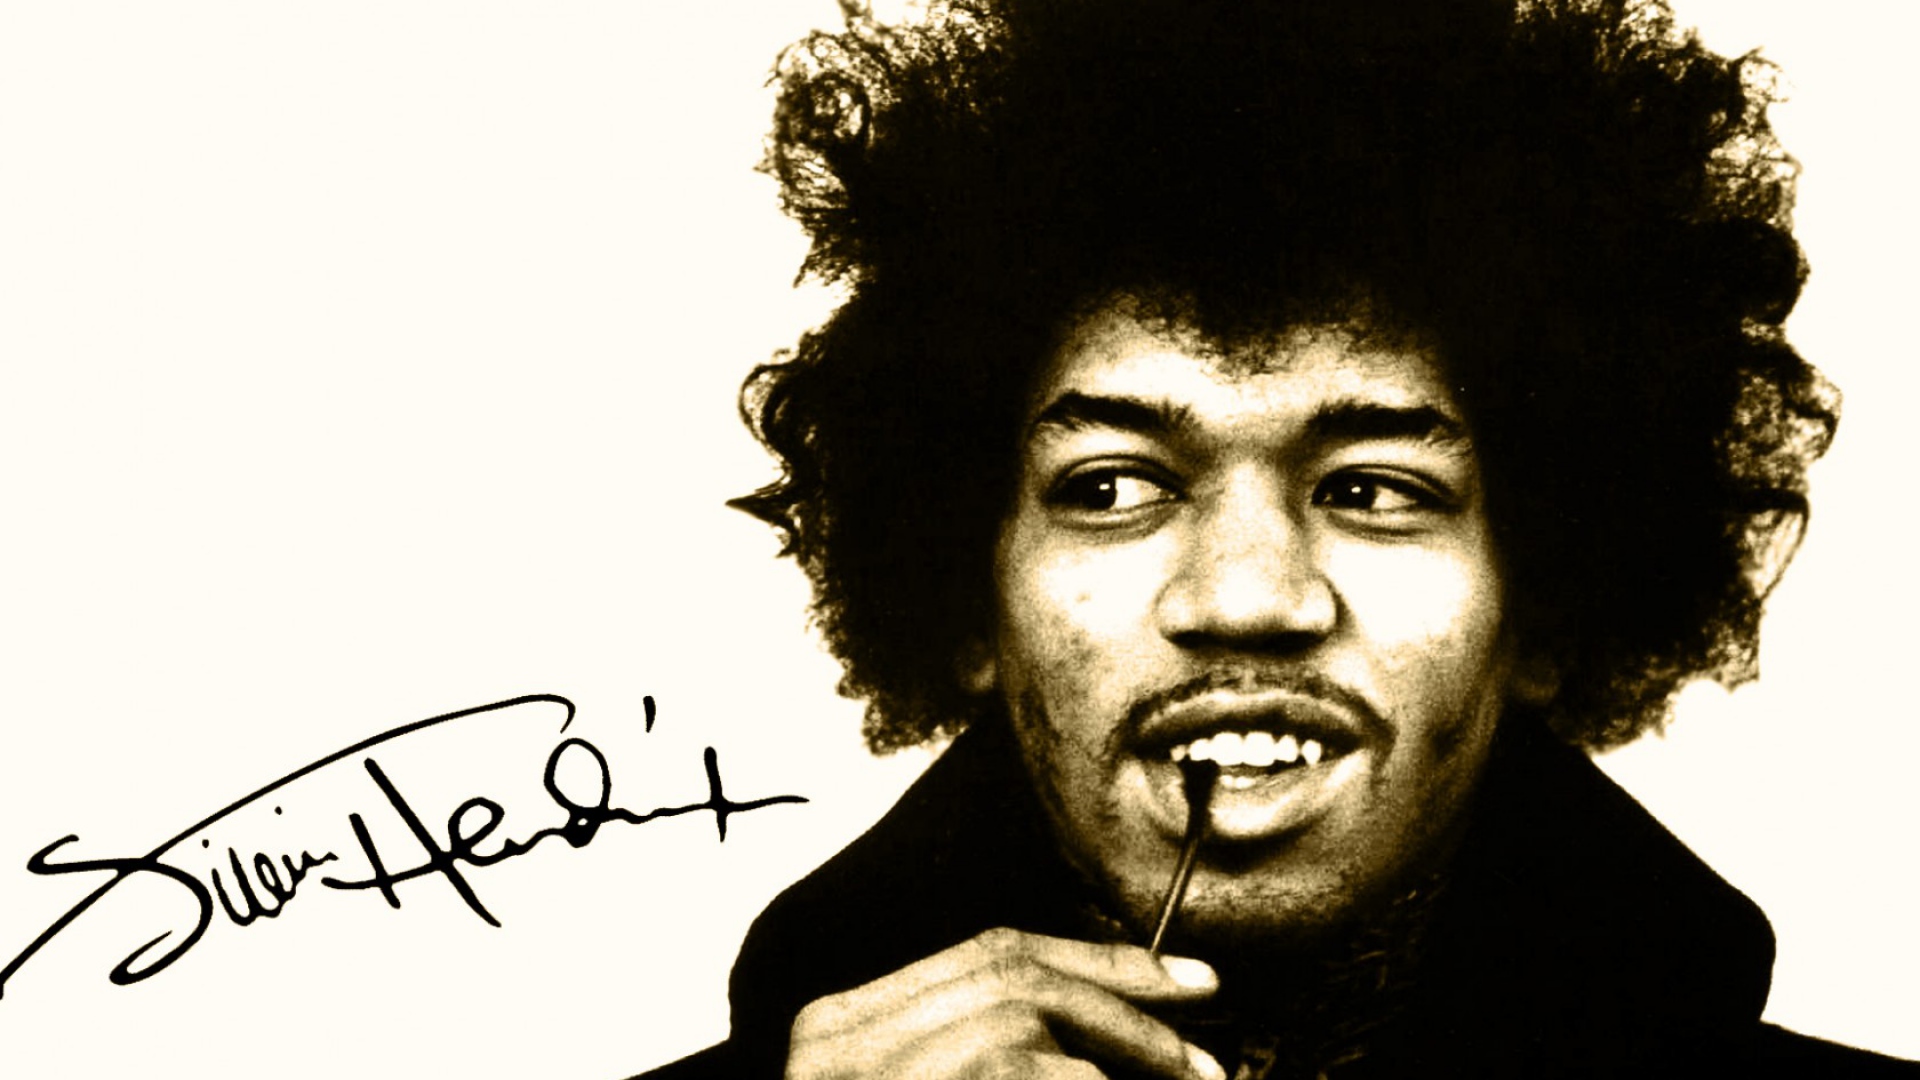 Jimi Hendrix Wallpapers High Resolution and Quality Download